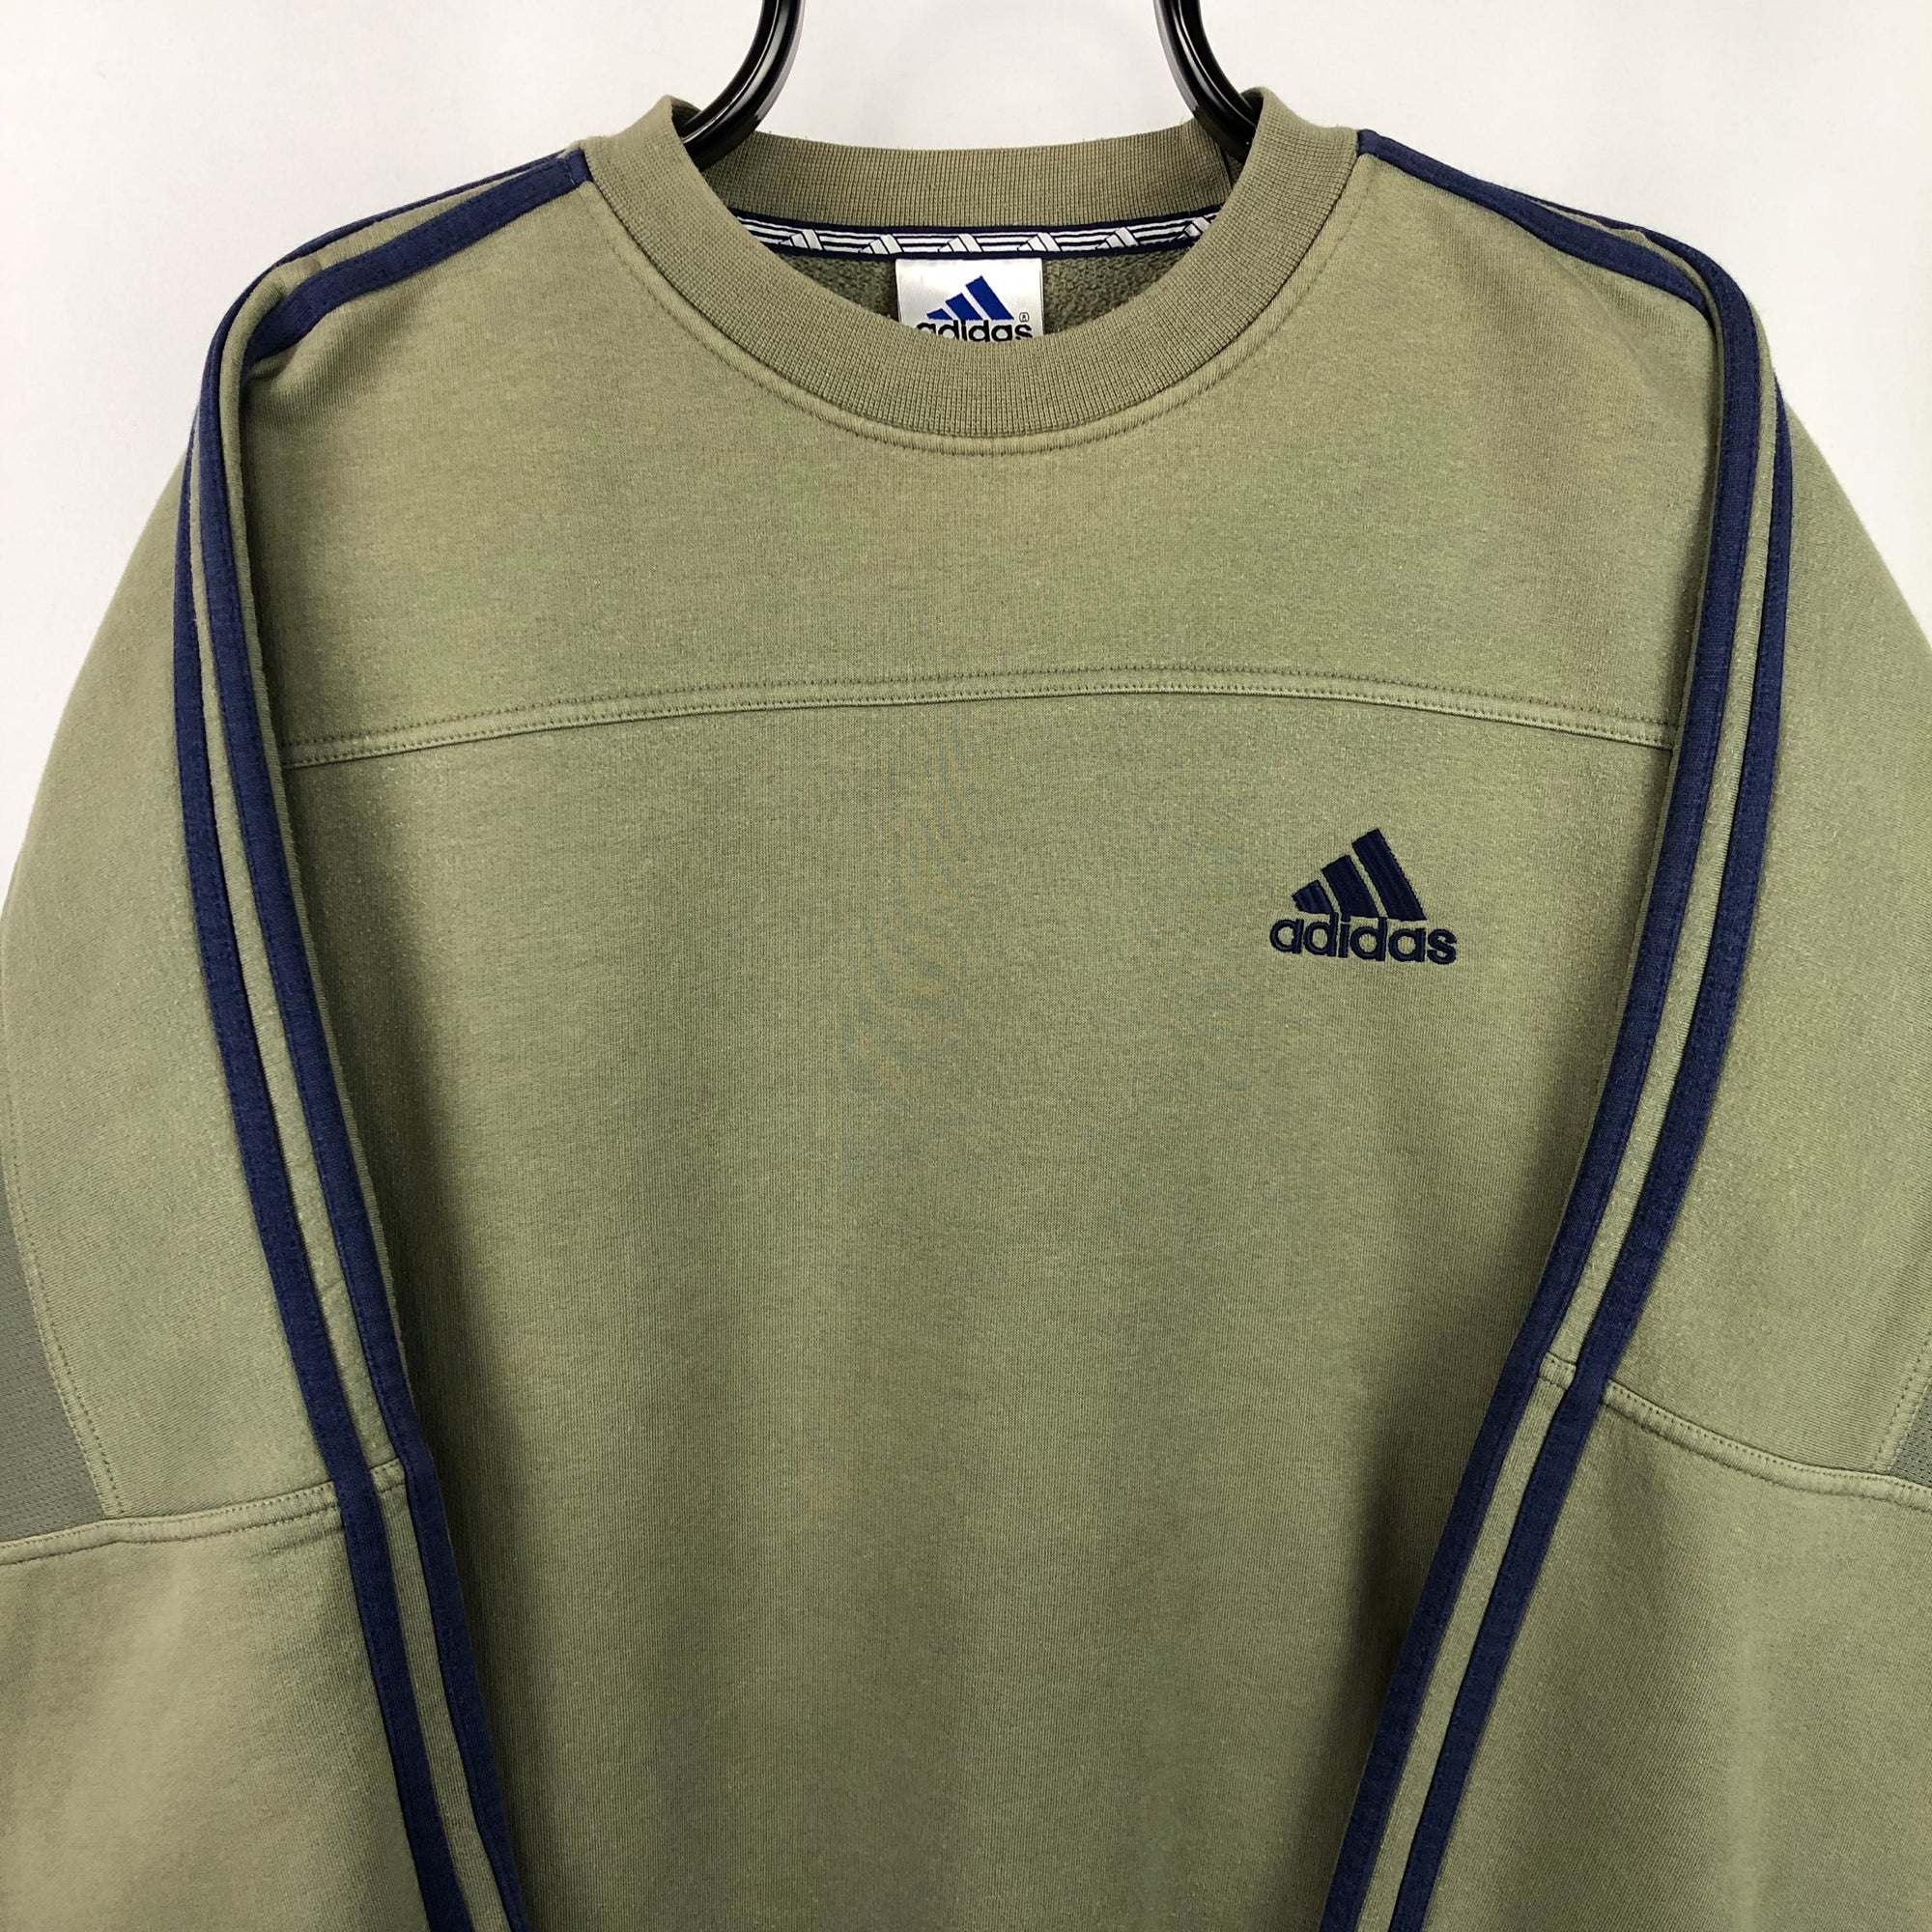 Vintage 90s Adidas Embroidered Small Logo Sweatshirt in Green/Navy - Men's Large/Women's XL